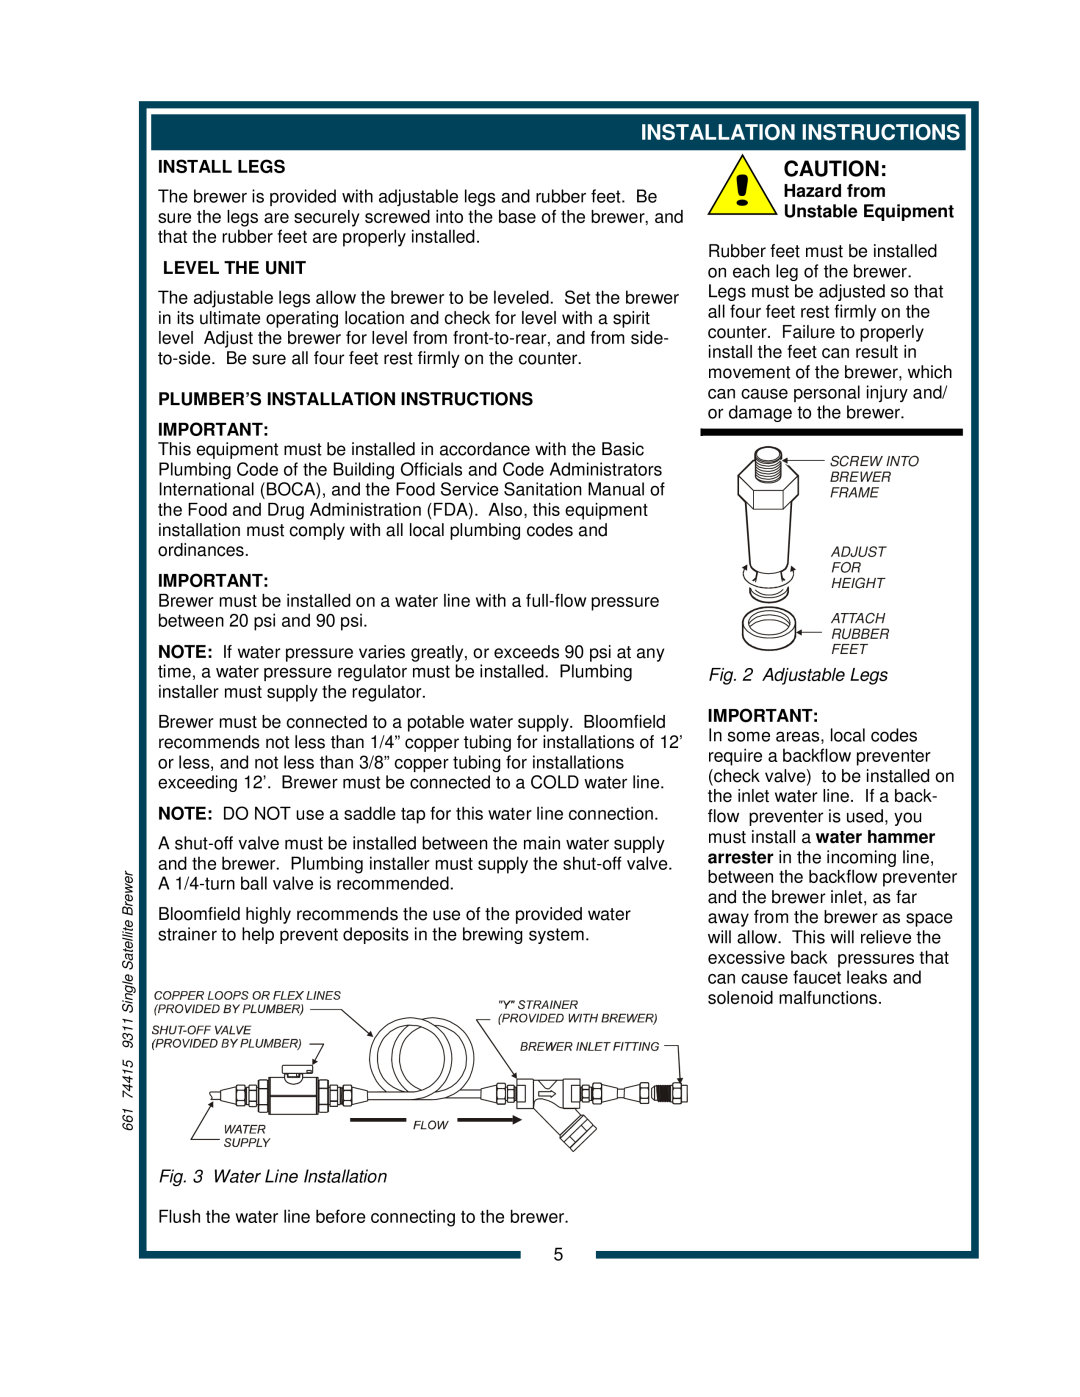 Bloomfield 9311 owner manual Install Legs, Level The Unit, Plumber’S Installation Instructions, Water Line Installation 